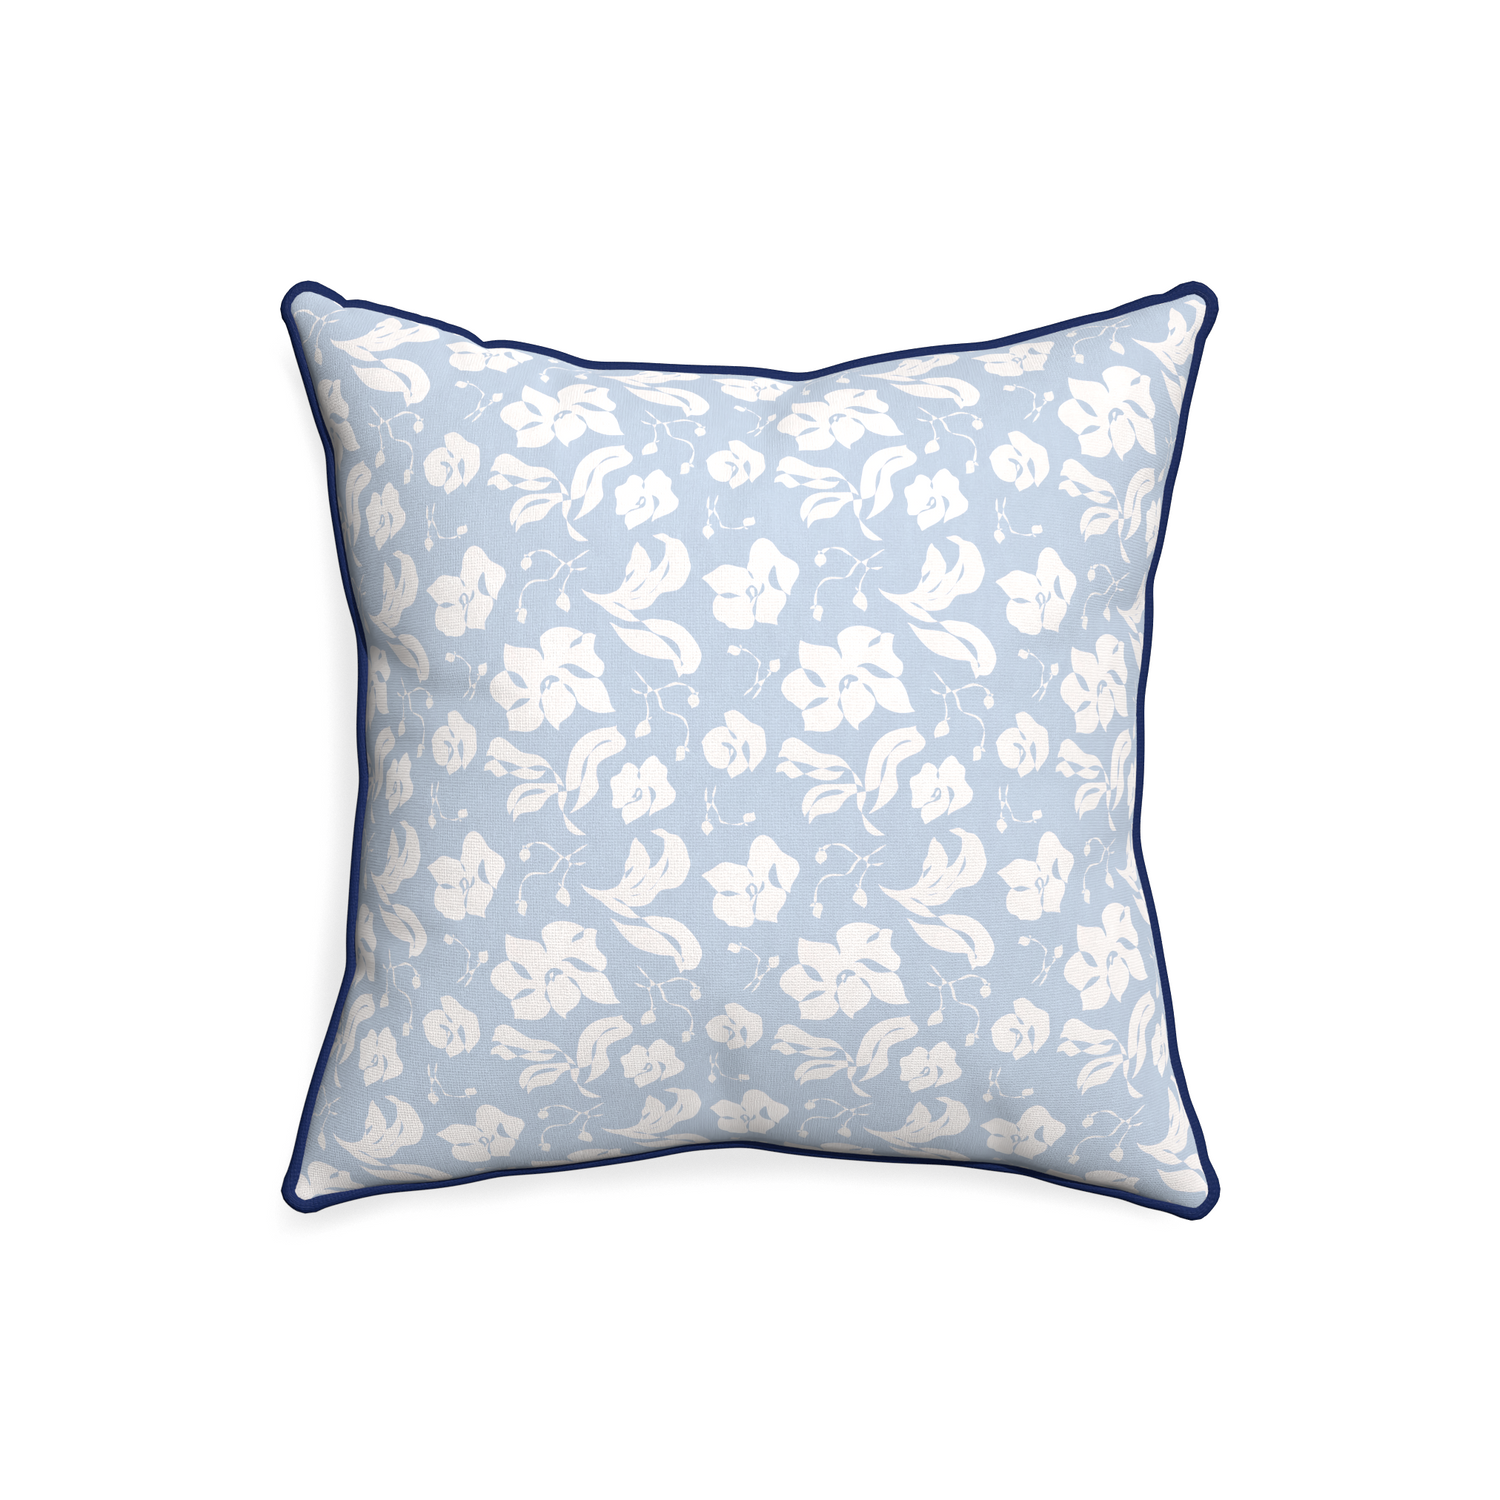 20-square georgia custom pillow with midnight piping on white background